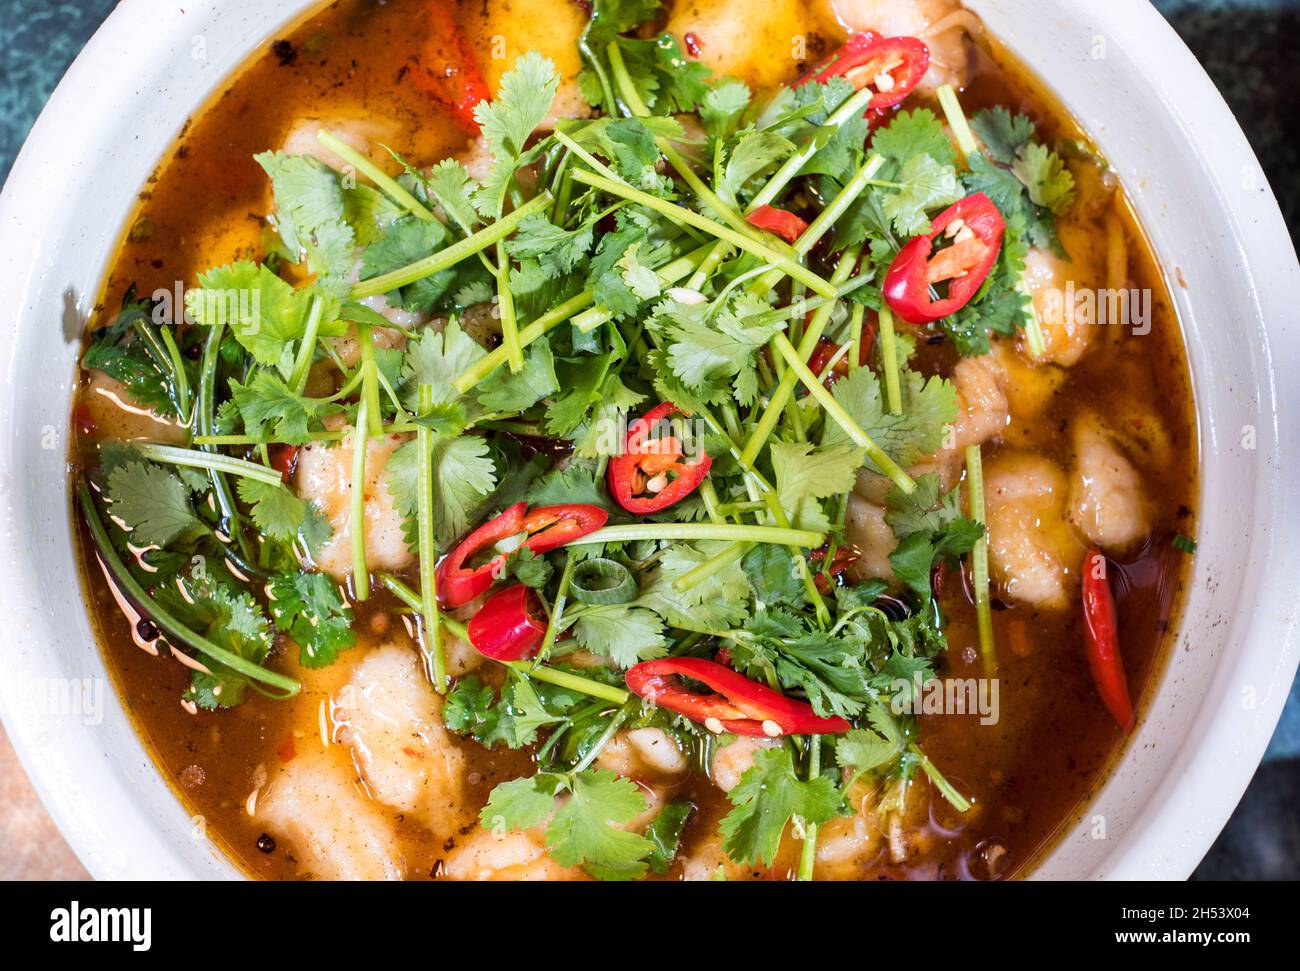 Sheffield, UK – 08 March 2018: Japanese seafood hotpot with chilli and coriander seasoning at Rice Inn, Devonshire Green Stock Photo